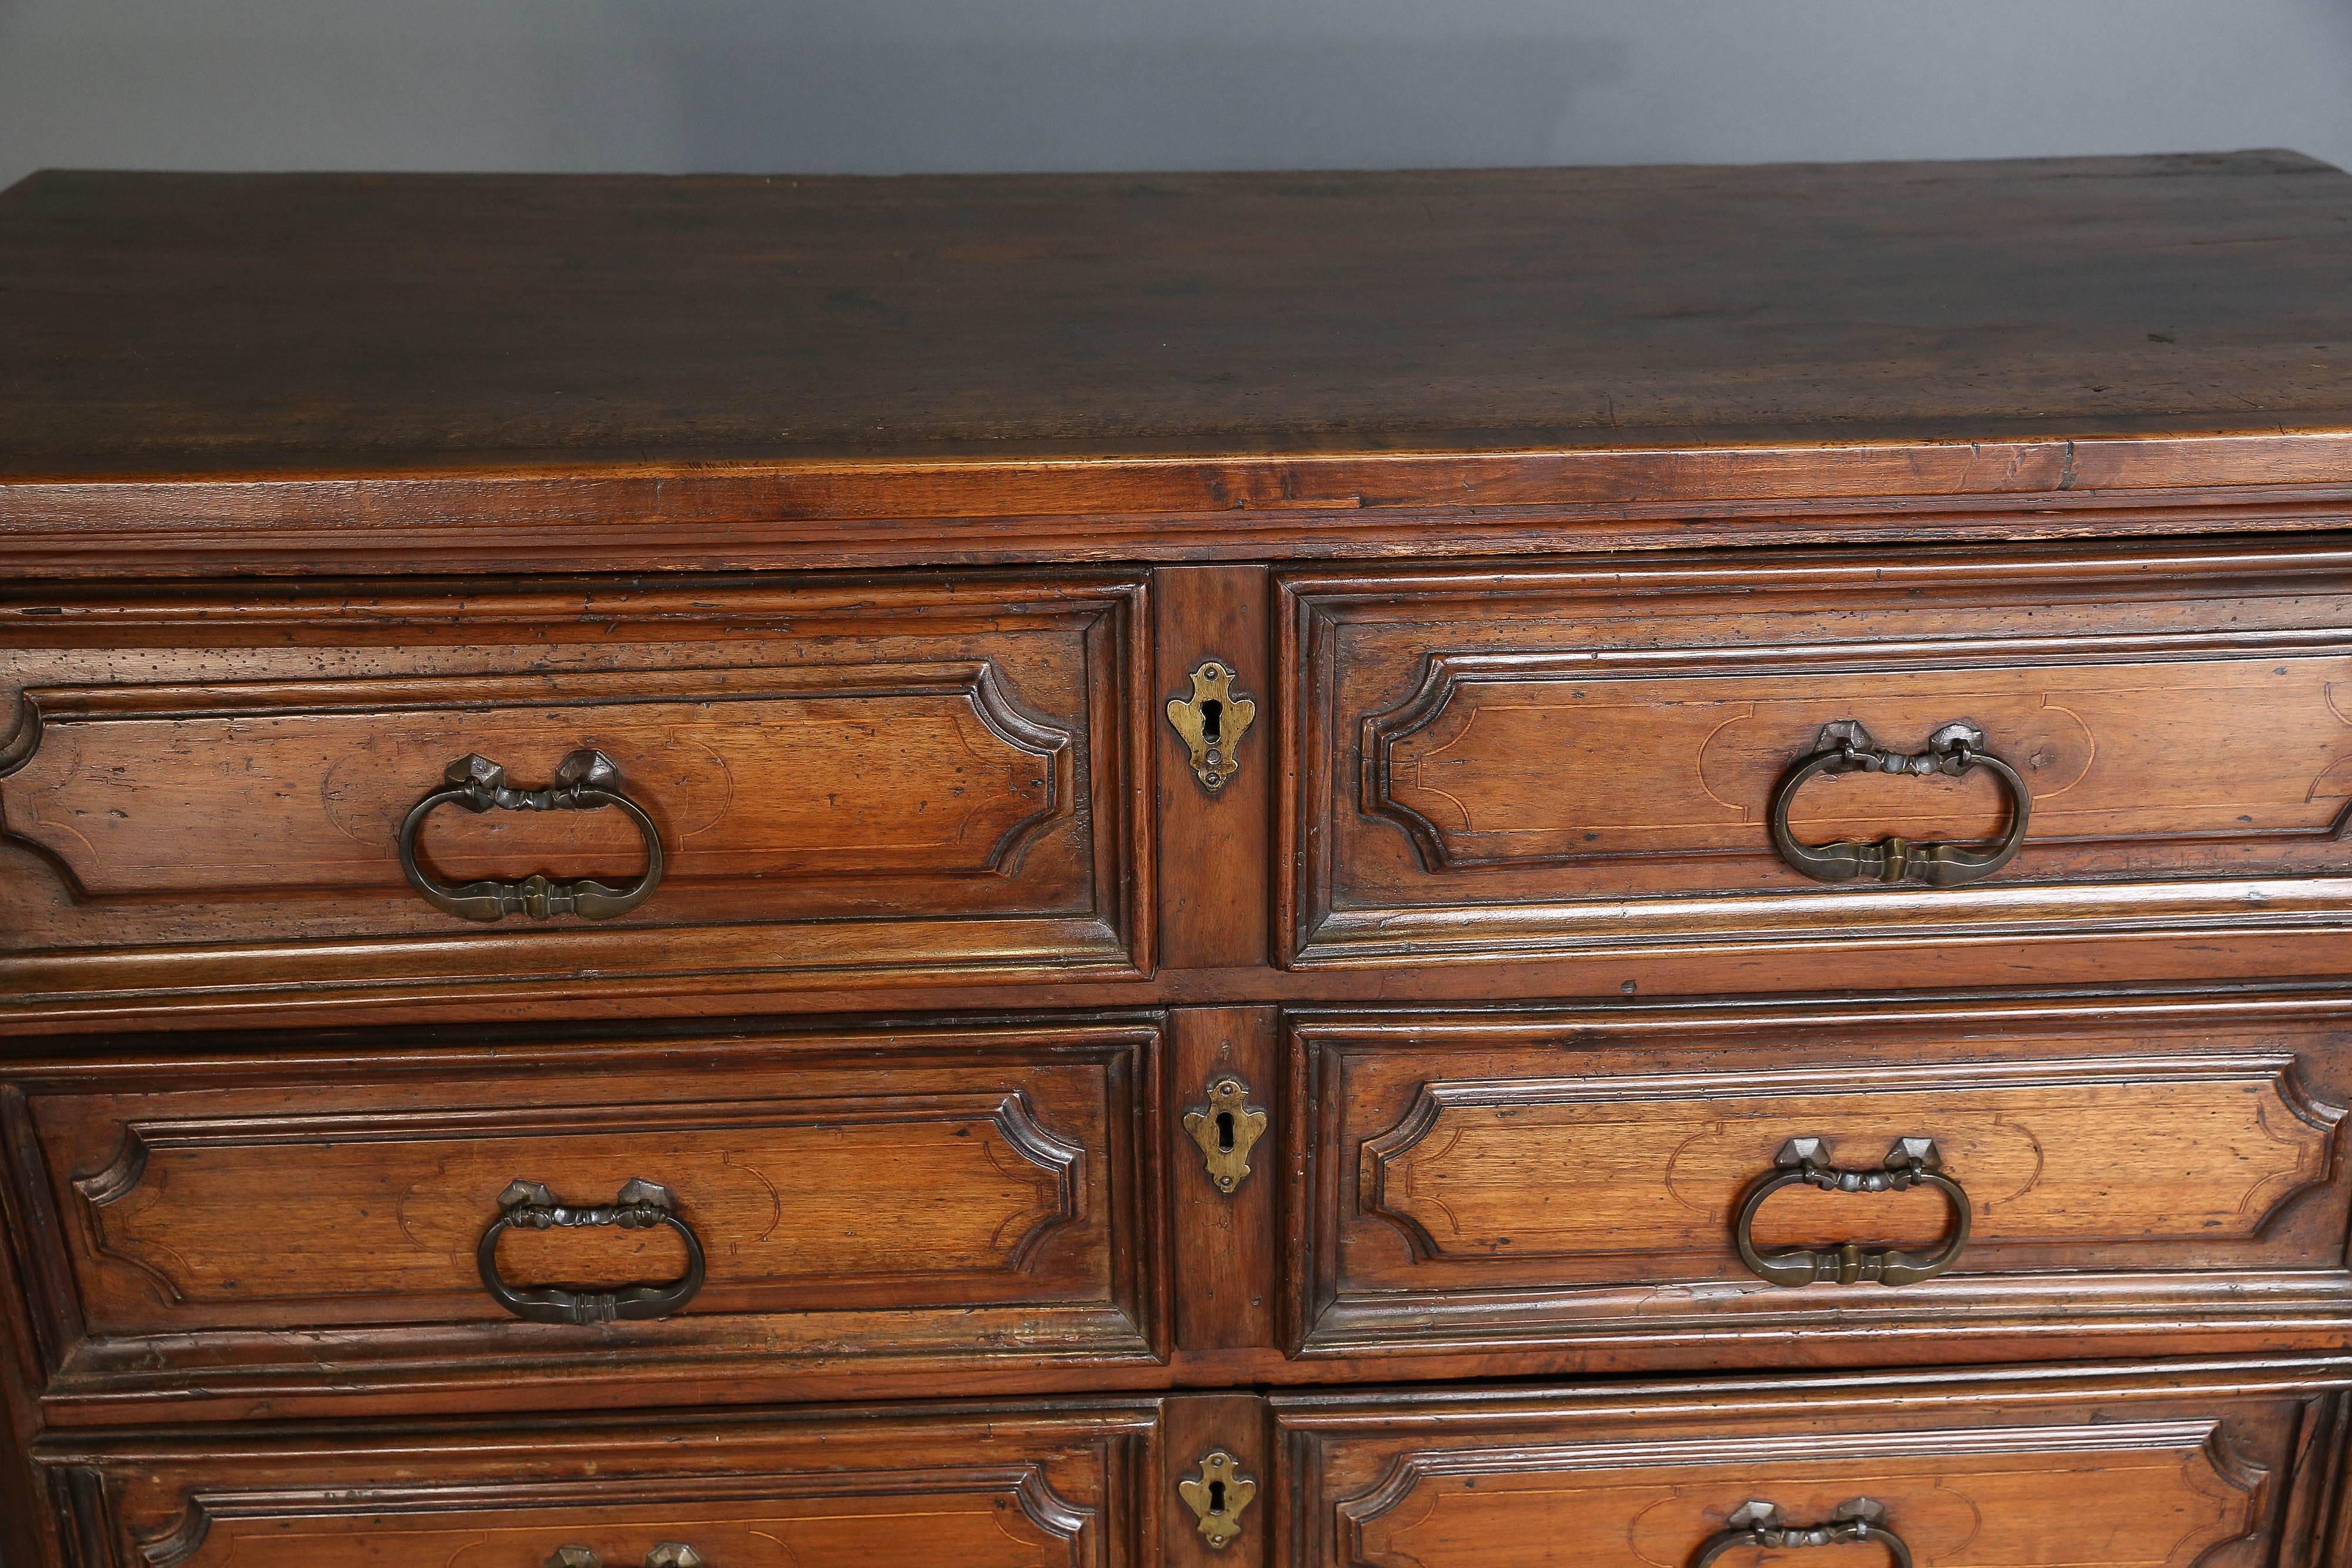 Antique 18th century Italian walnut chest of drawers with four drawers and original hardware on bracket feet. Beautiful patina.